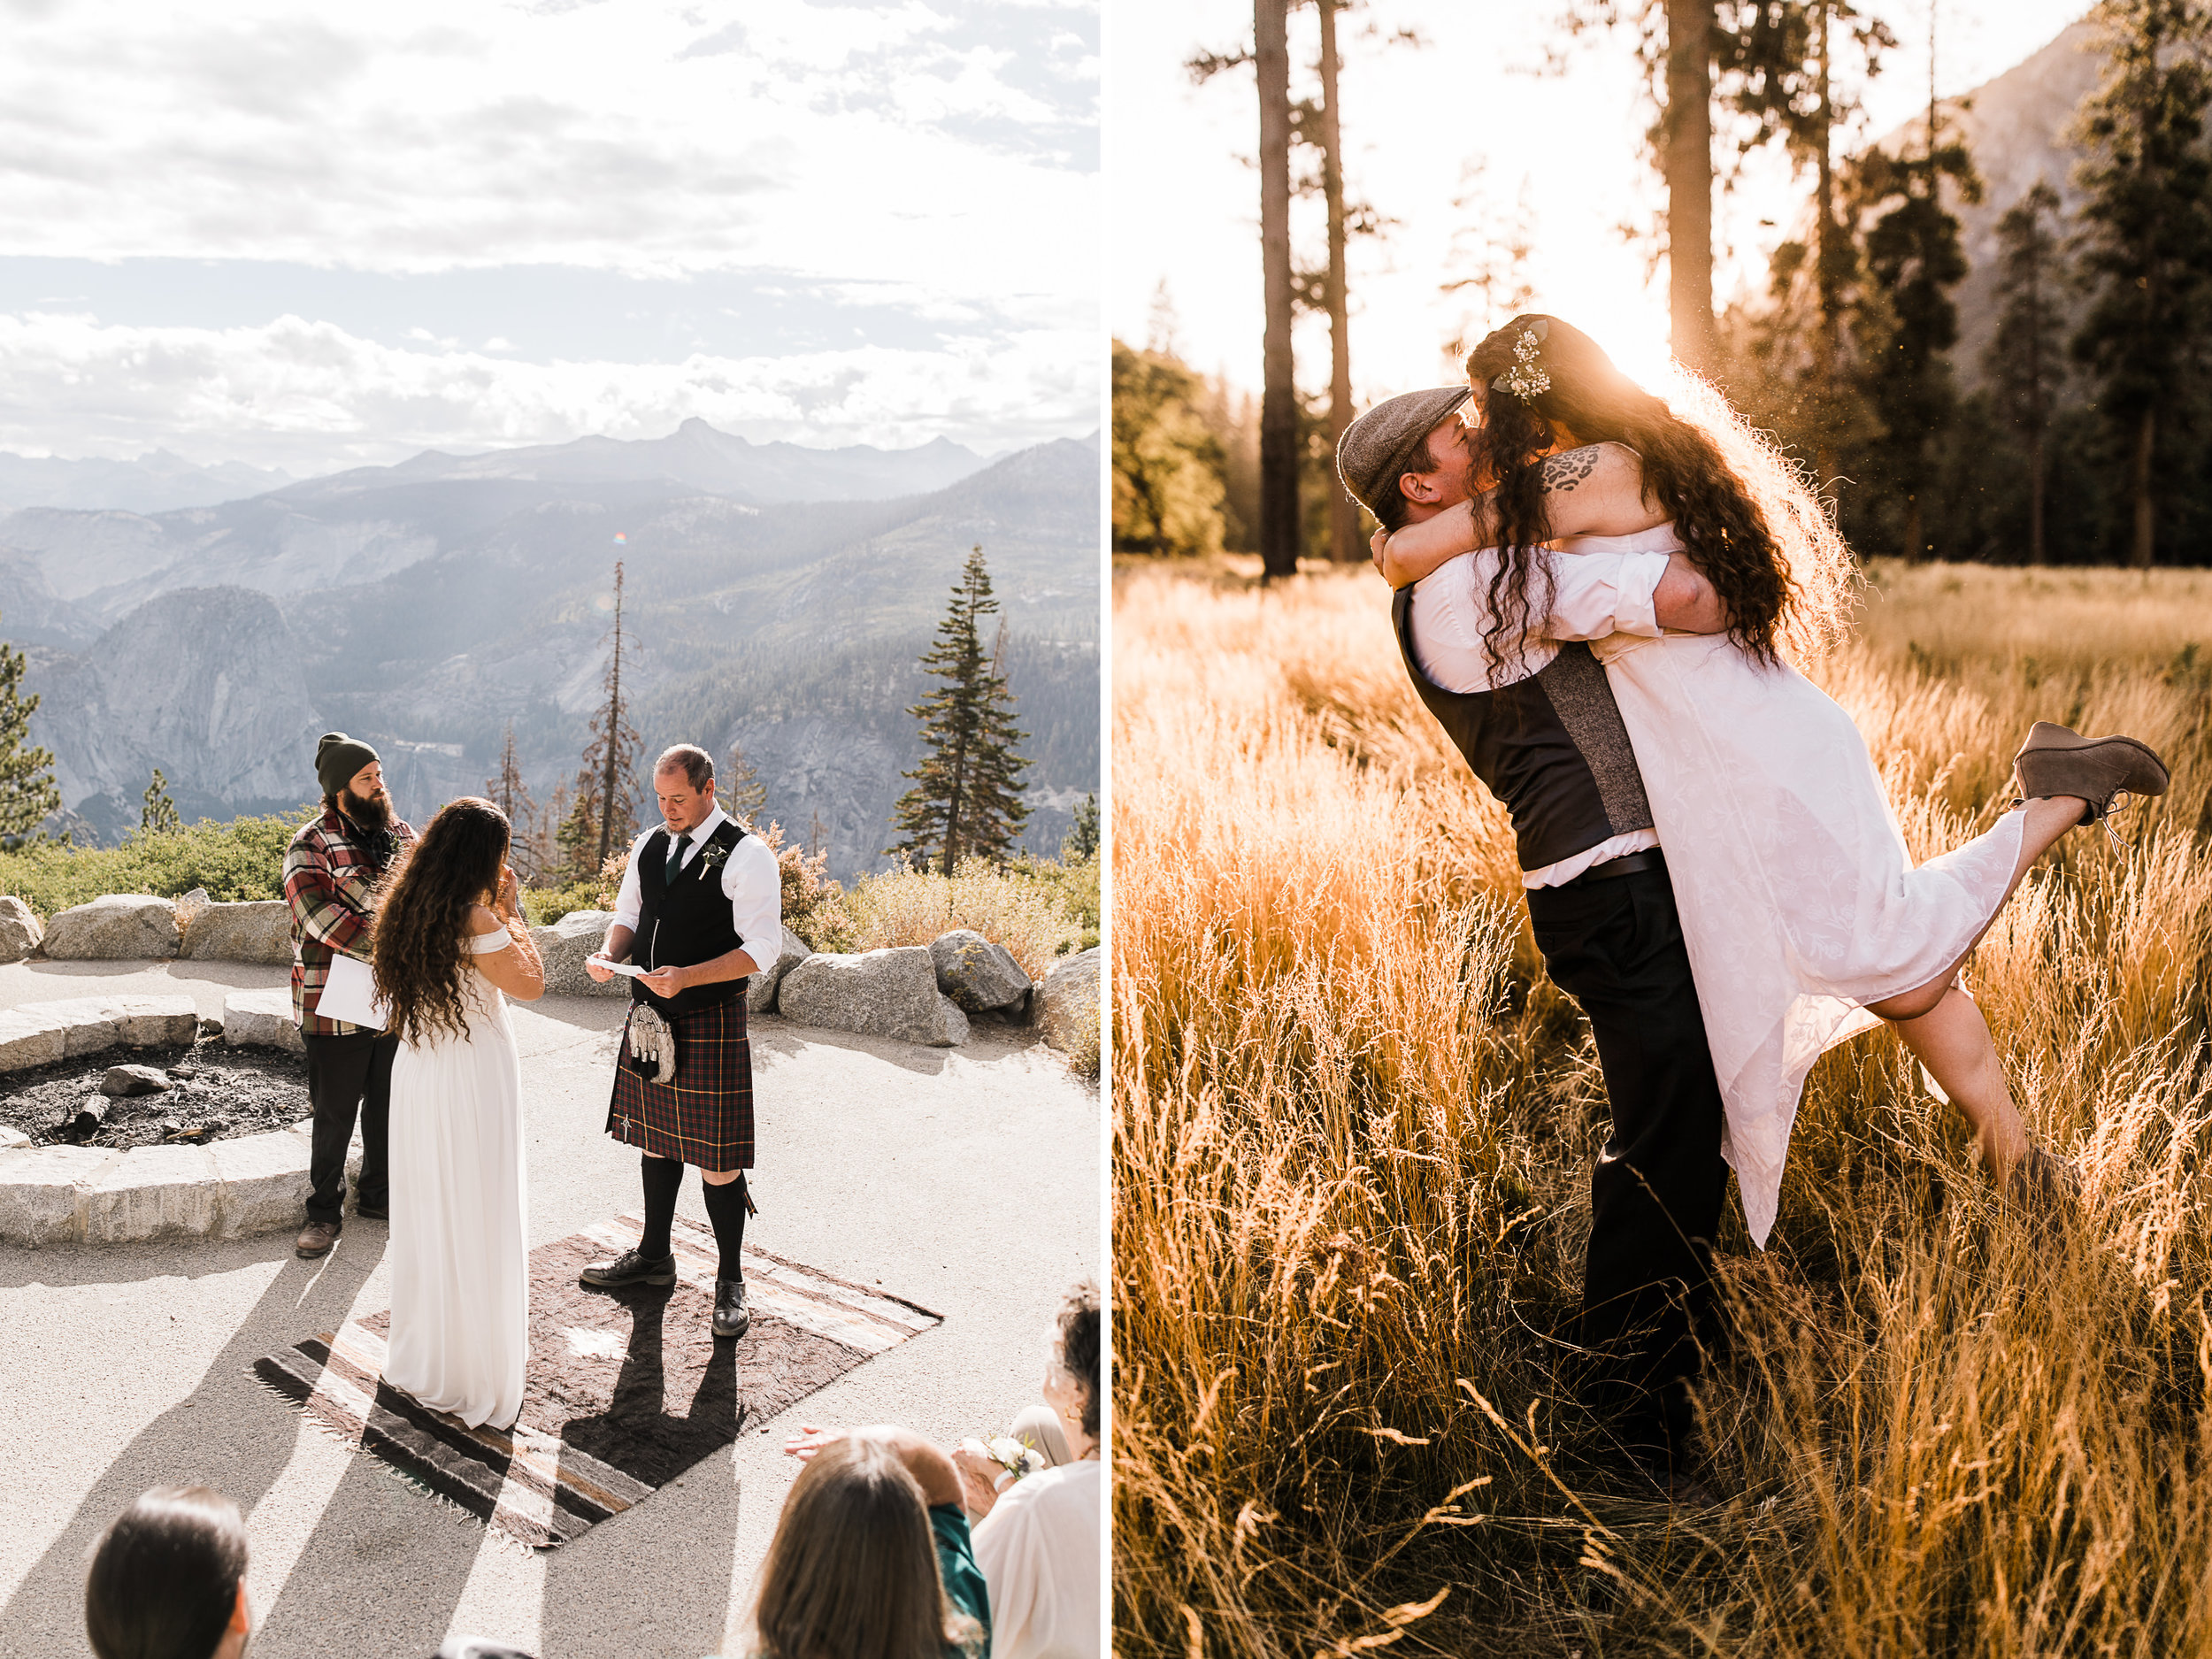 morgan + trevor’s intimate wedding in yosemite national park | private vows at sunrise + wedding ceremony at Glacier Point | groom wearing a kilt | adventure elopement photographer